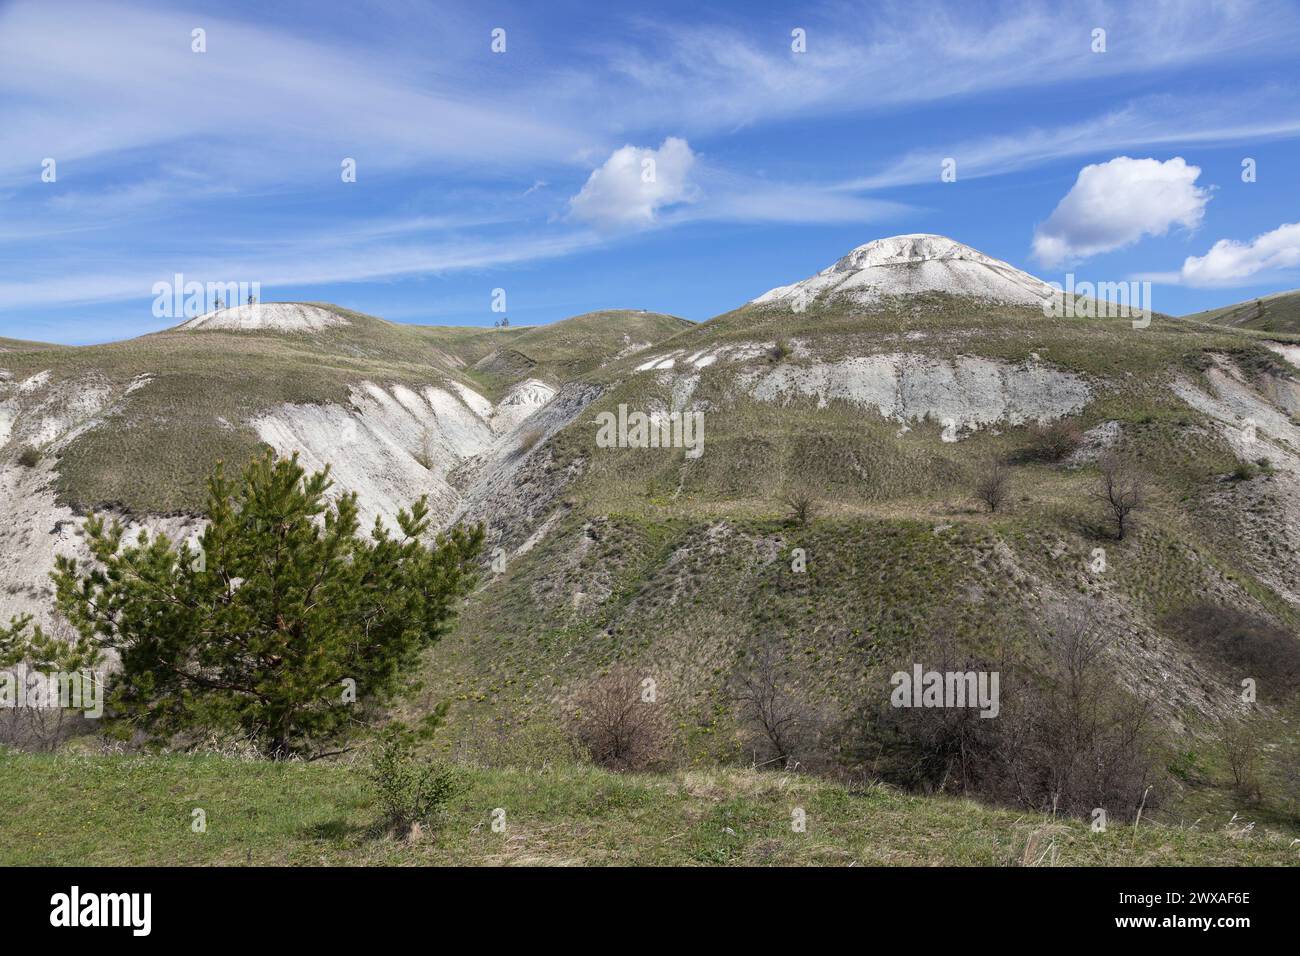 Chalk hills in Ulyanovsk region, Russia. Yellow flowers in the foreground Stock Photo